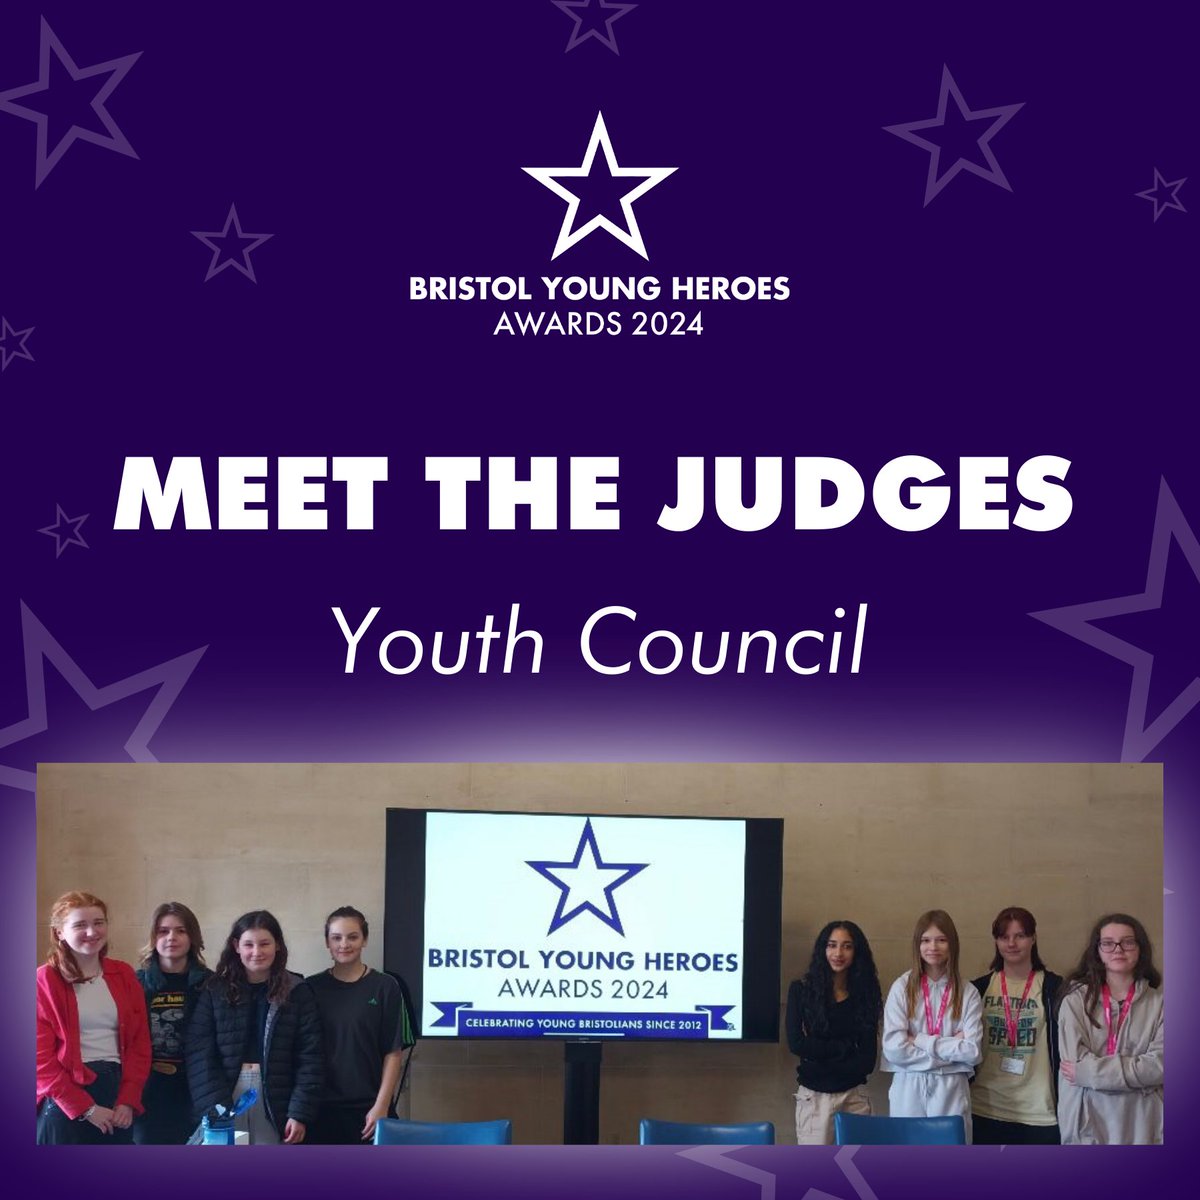 ✨Introducing the Youth Council✨ The first round of judging for the Bristol Young Heroes Awards is carried out by the young people of Bristol who are a part of the city's Youth Council. #empoweringpeople #BYHA2024 #BYHA #YouthCouncil @BristolCYC